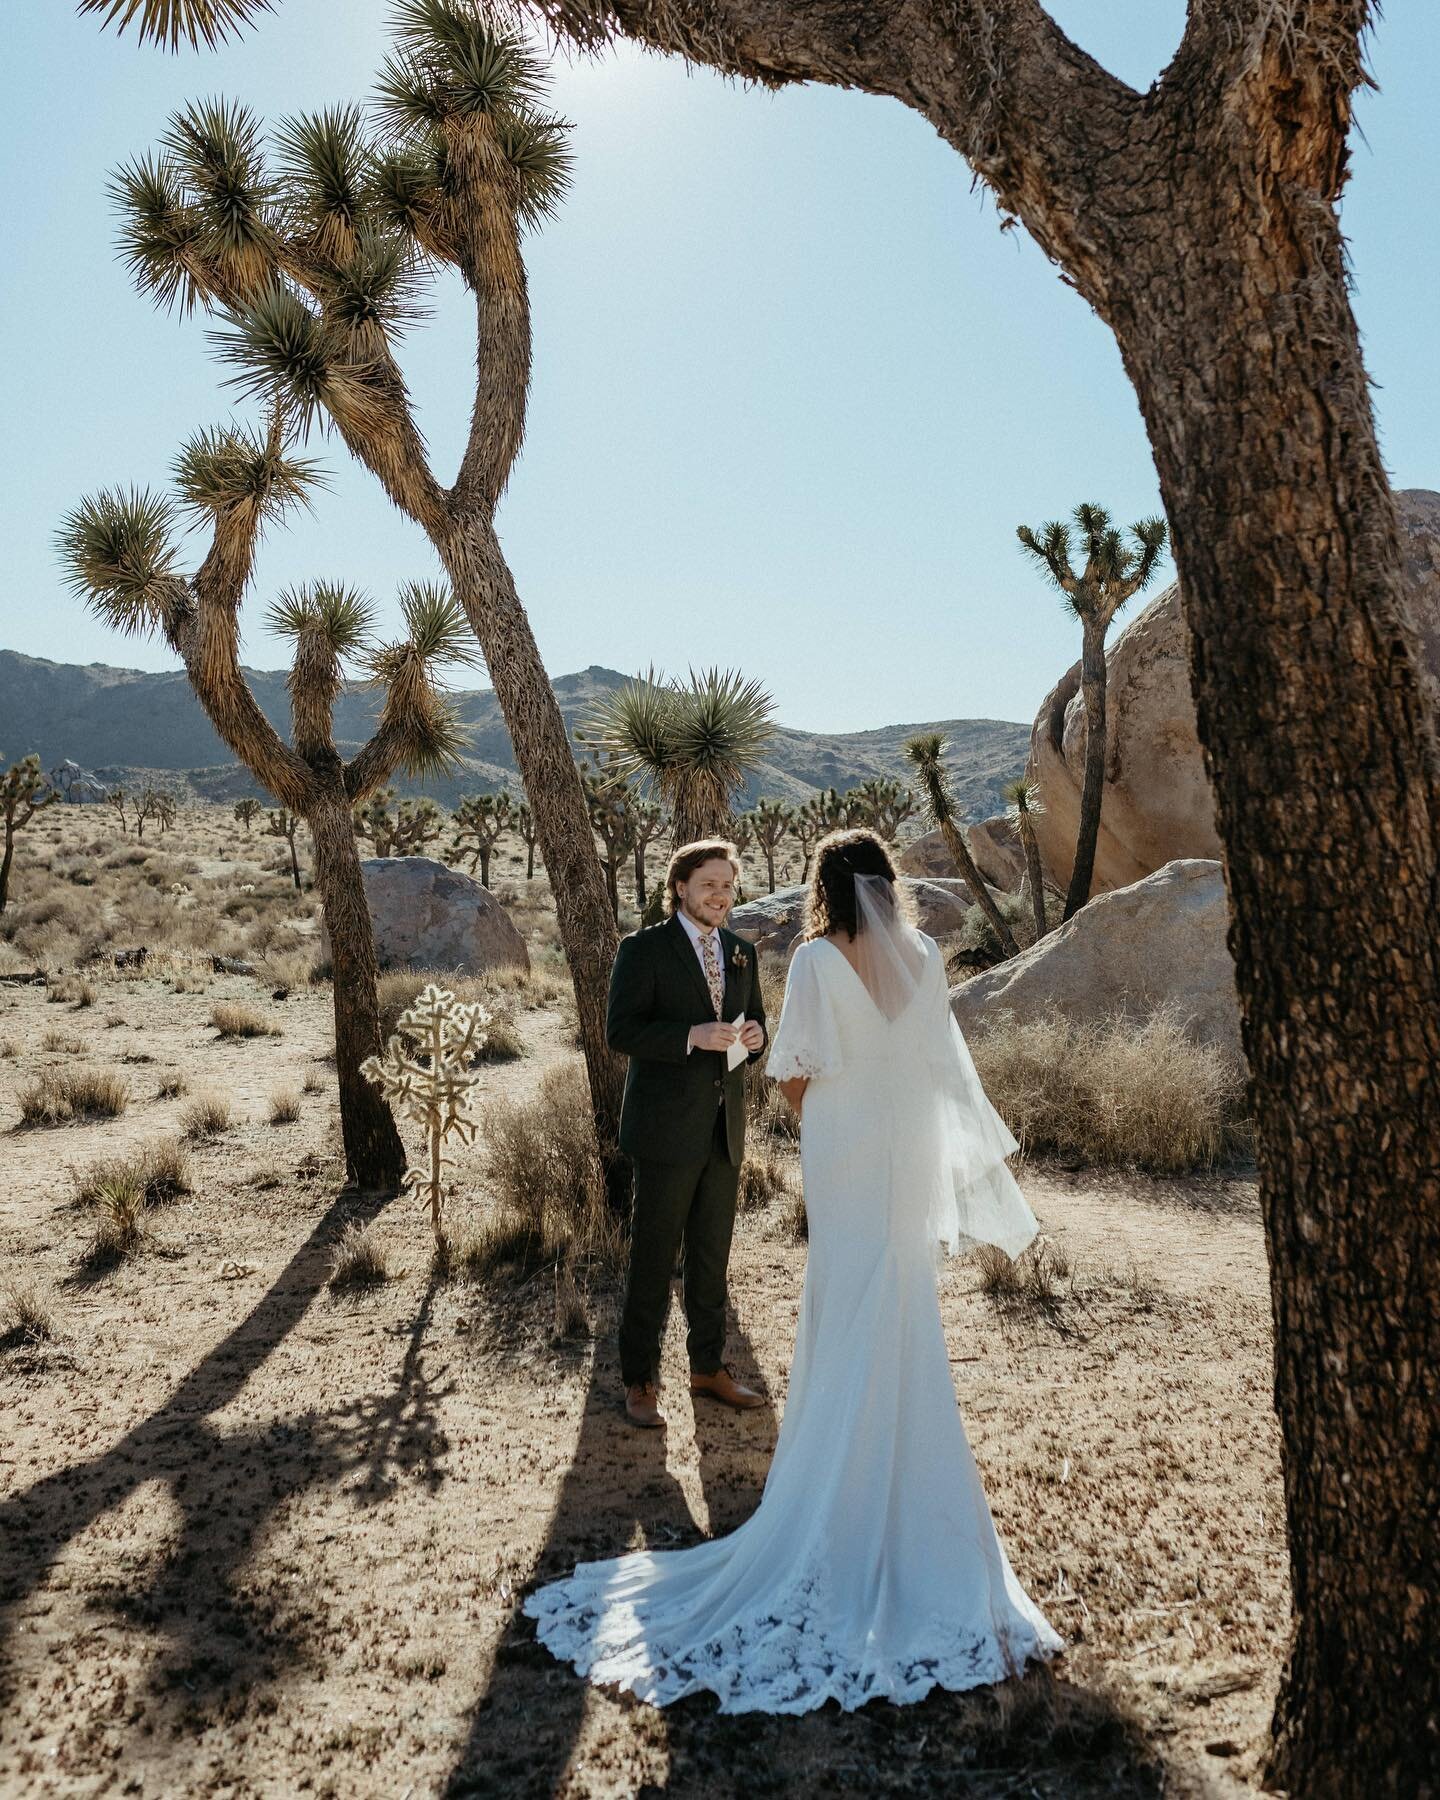 When we think about this elopement in Joshua Tree, one thing comes to mind: be bold. 

Six weeks prior to their elopement, Haley and Nathan came to us originally wanting to elope in our home state of WV with only one must-have: the date had to be on 